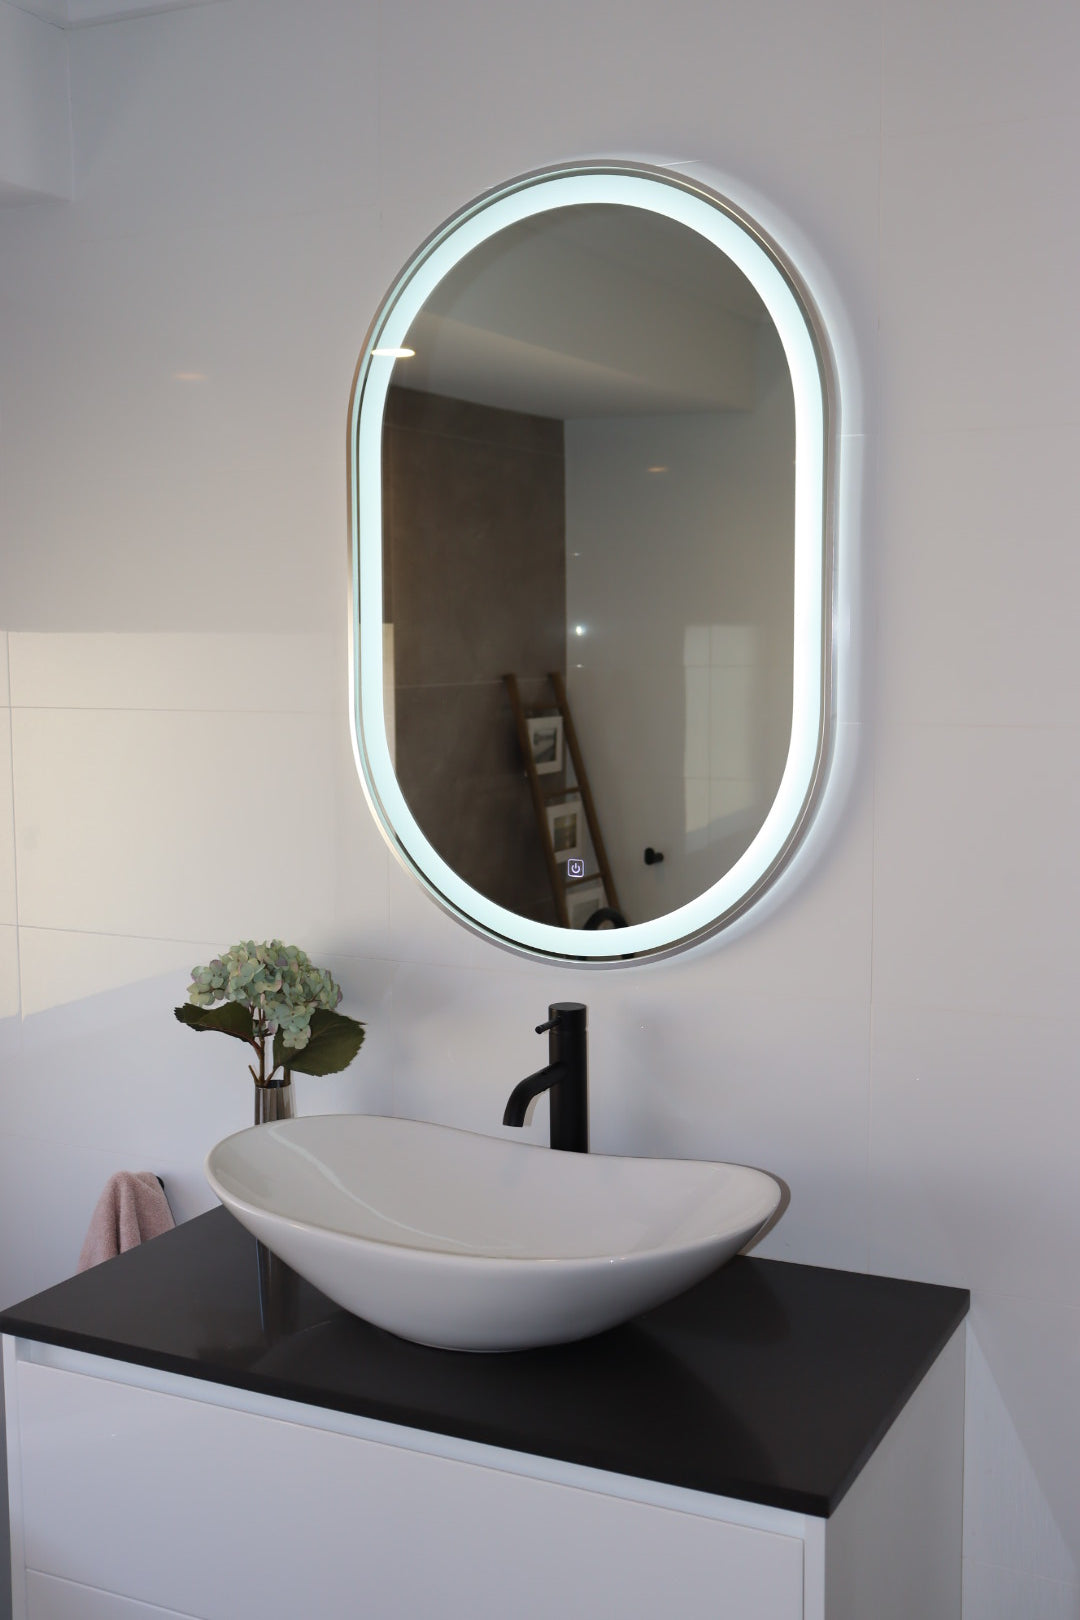 Chic Oval LED Mirror in Modern White Bathroom with Black Accents and Stylish Wall Tiles